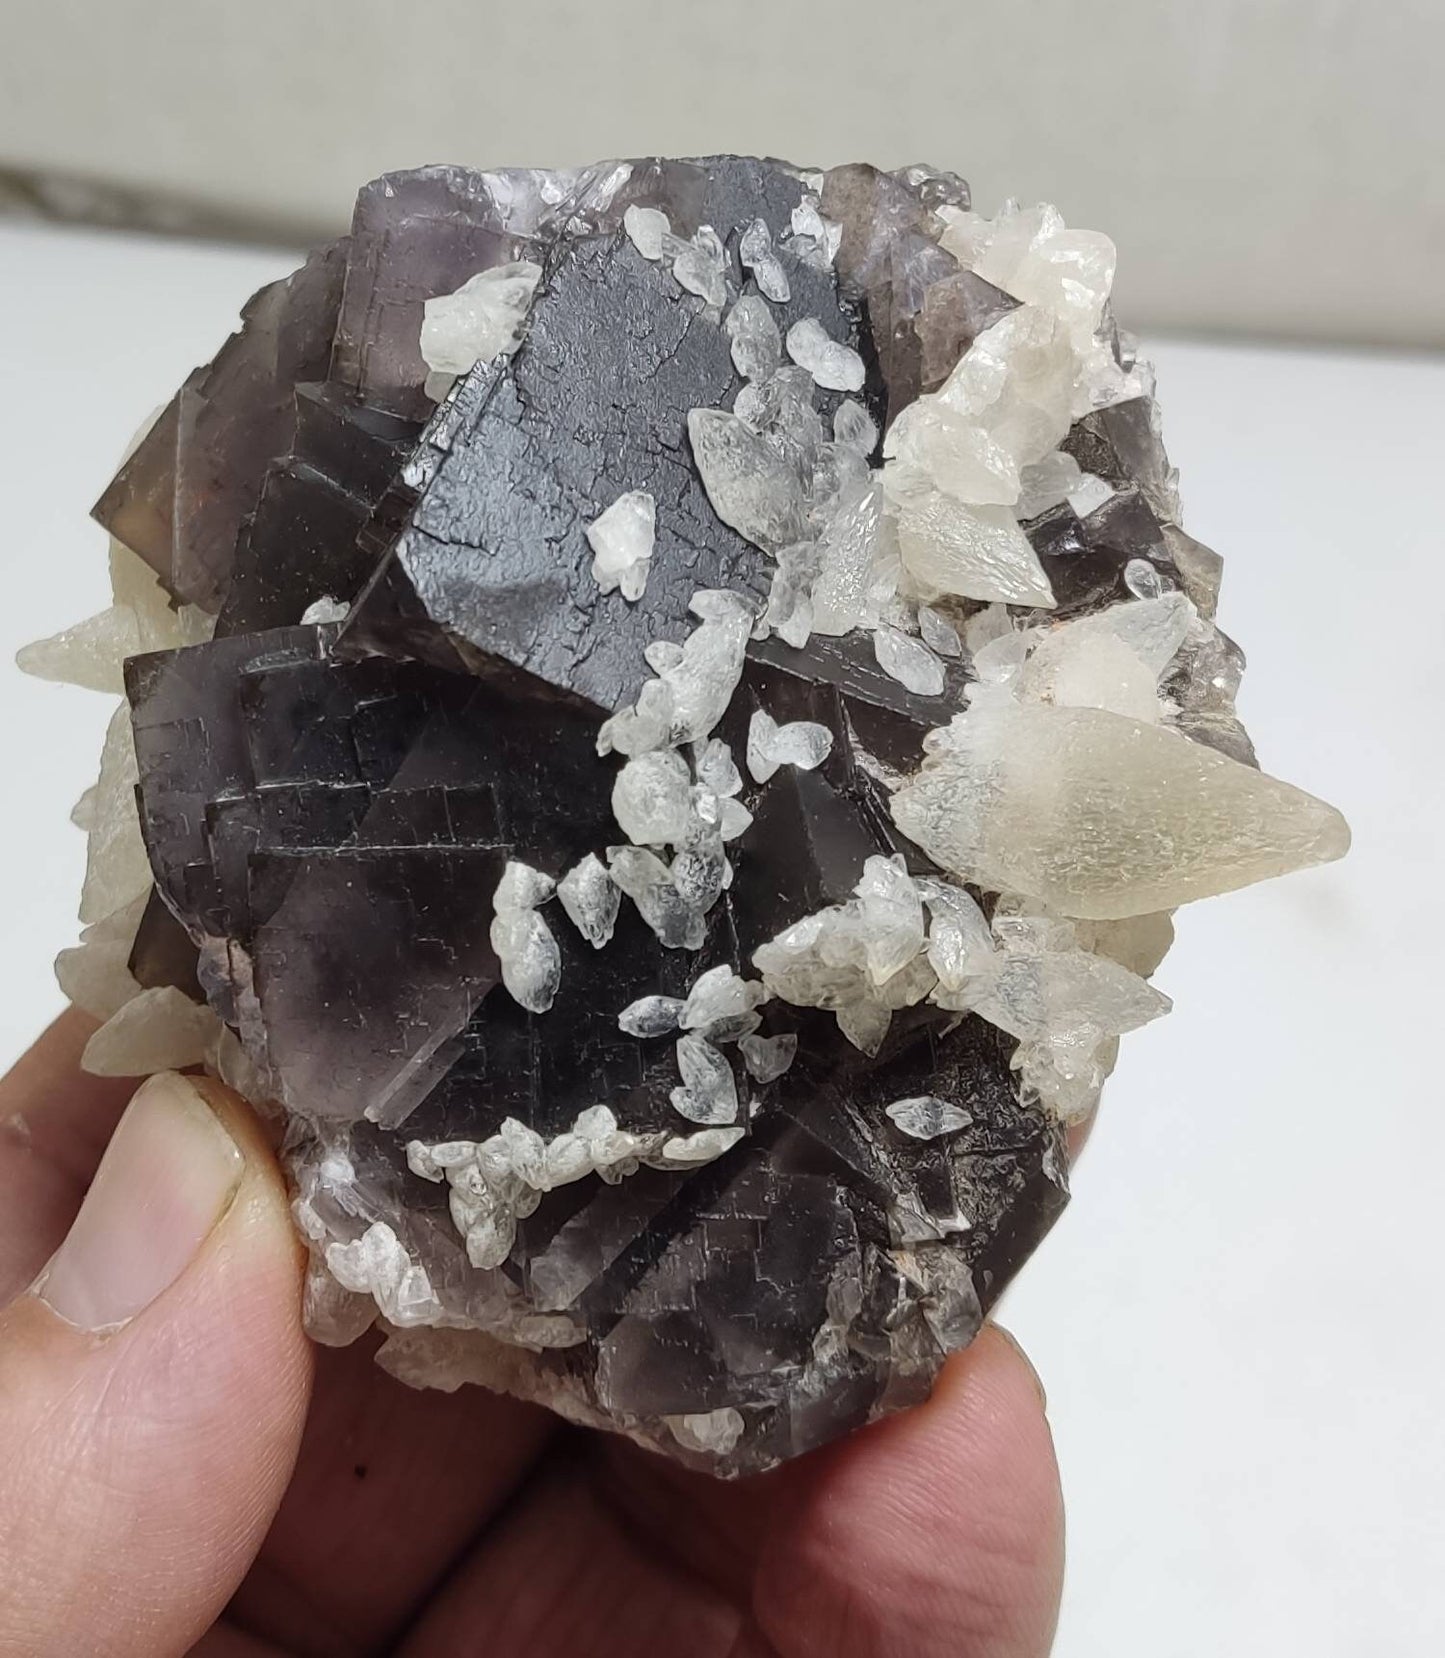 An amazing Single beautiful specimen of grey fluorite with calcite crystals 364 grams